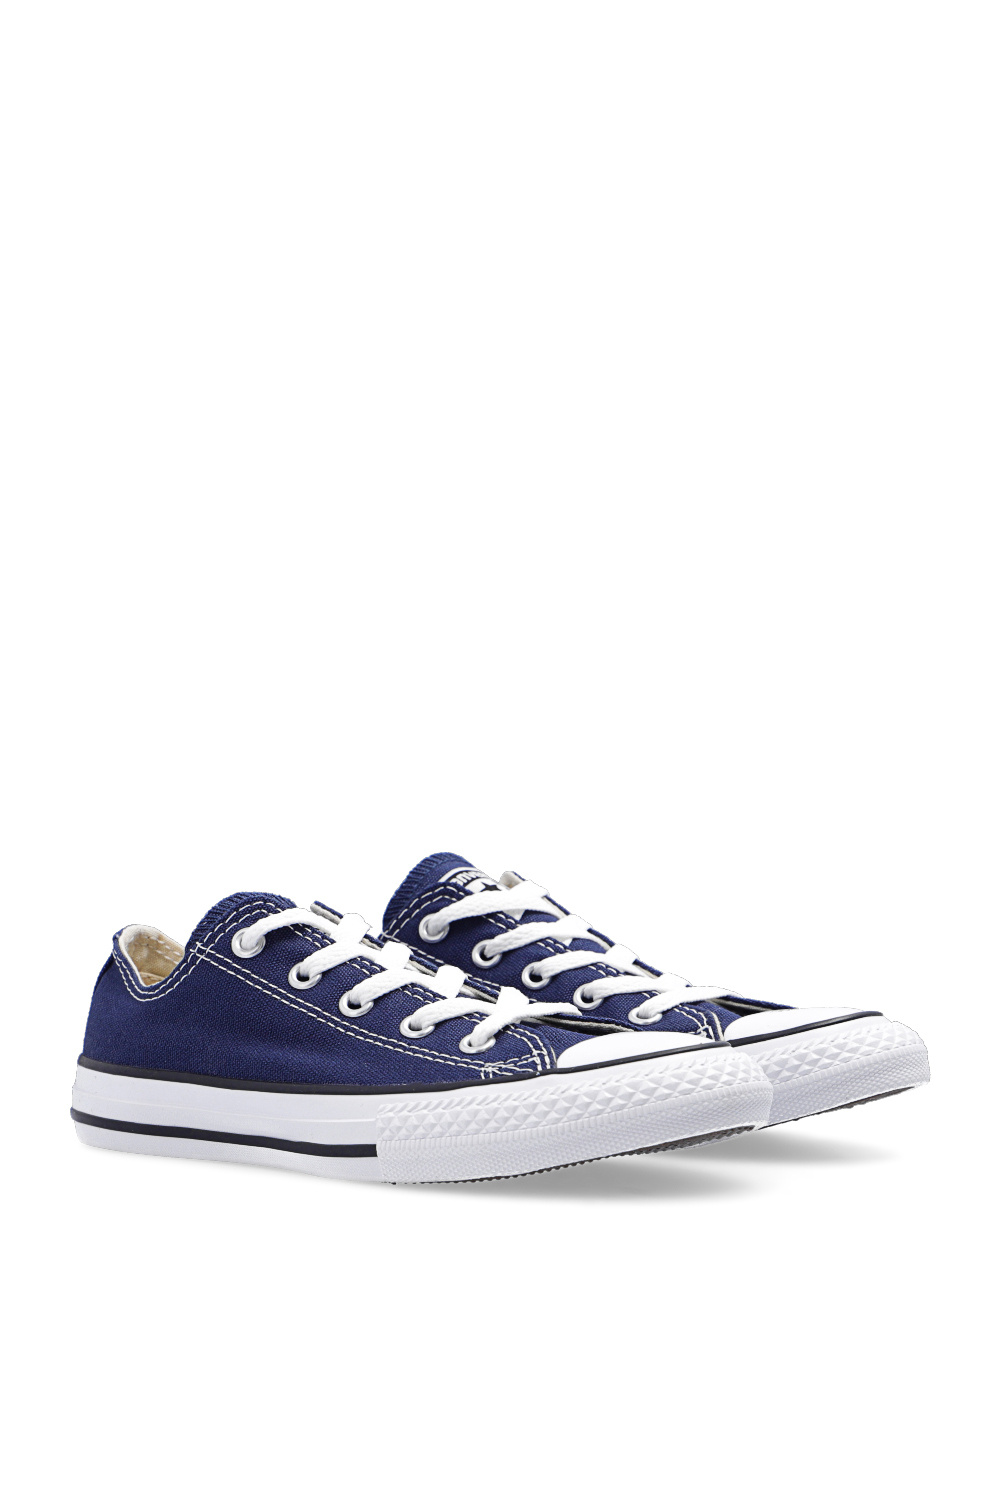 Converse Kids Converse One Star Sneakers Shoes 173200C